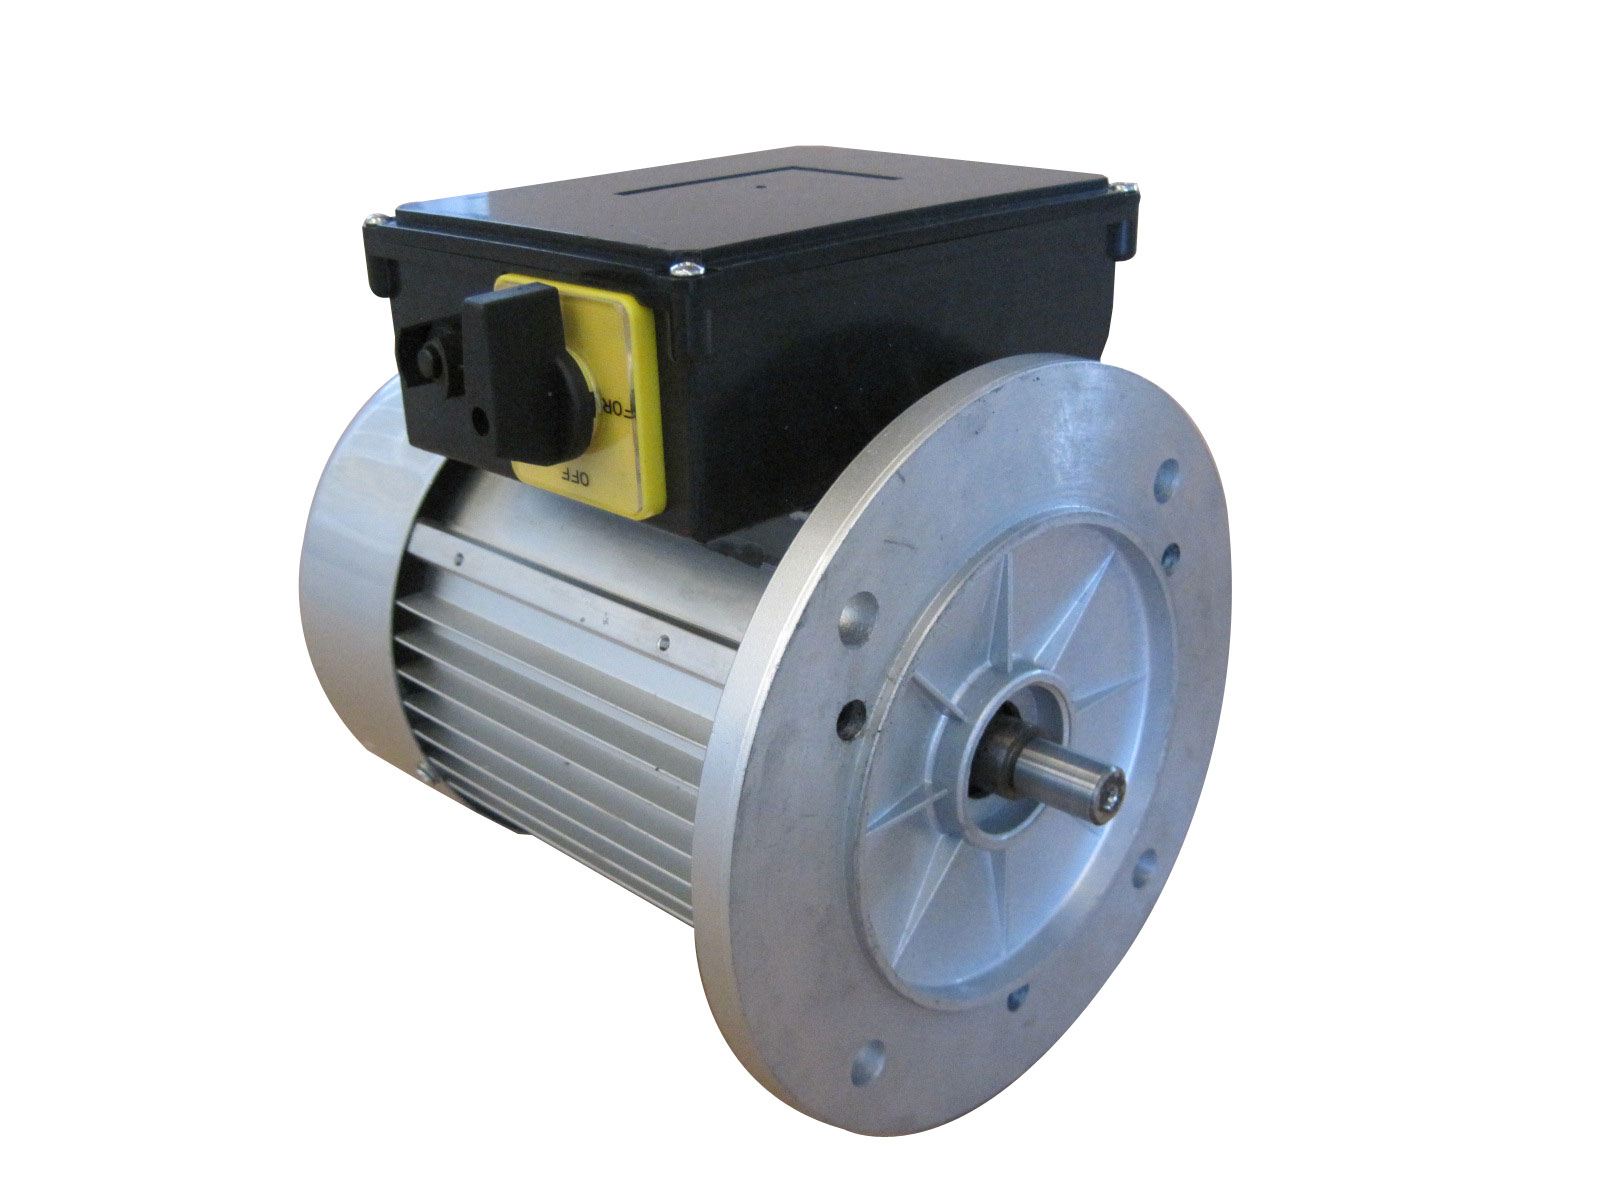 1.5 KW Meat Band Saw Motor